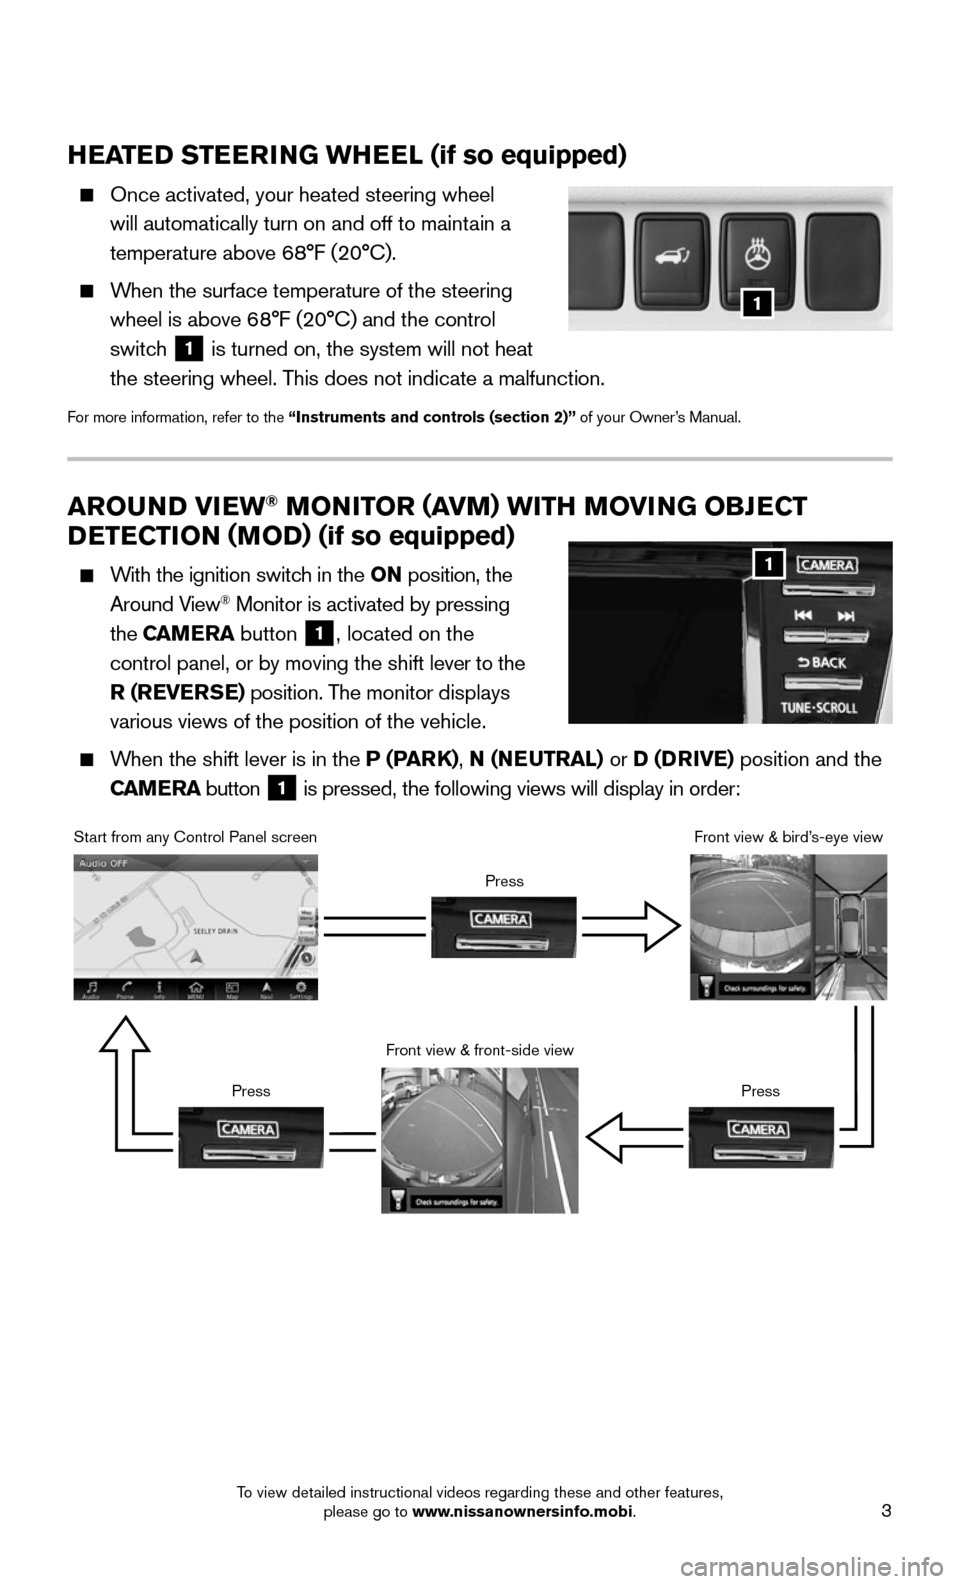 NISSAN MURANO 2015 3.G Quick Reference Guide 3
AROUND VIEW® MONITOR (AVM) WITH MOVING OBJECT 
DETECTION (MOD) (if so equipped)
    With the ignition switch in the ON position, the 
Around View® Monitor is activated by pressing 
the CAMERA butt